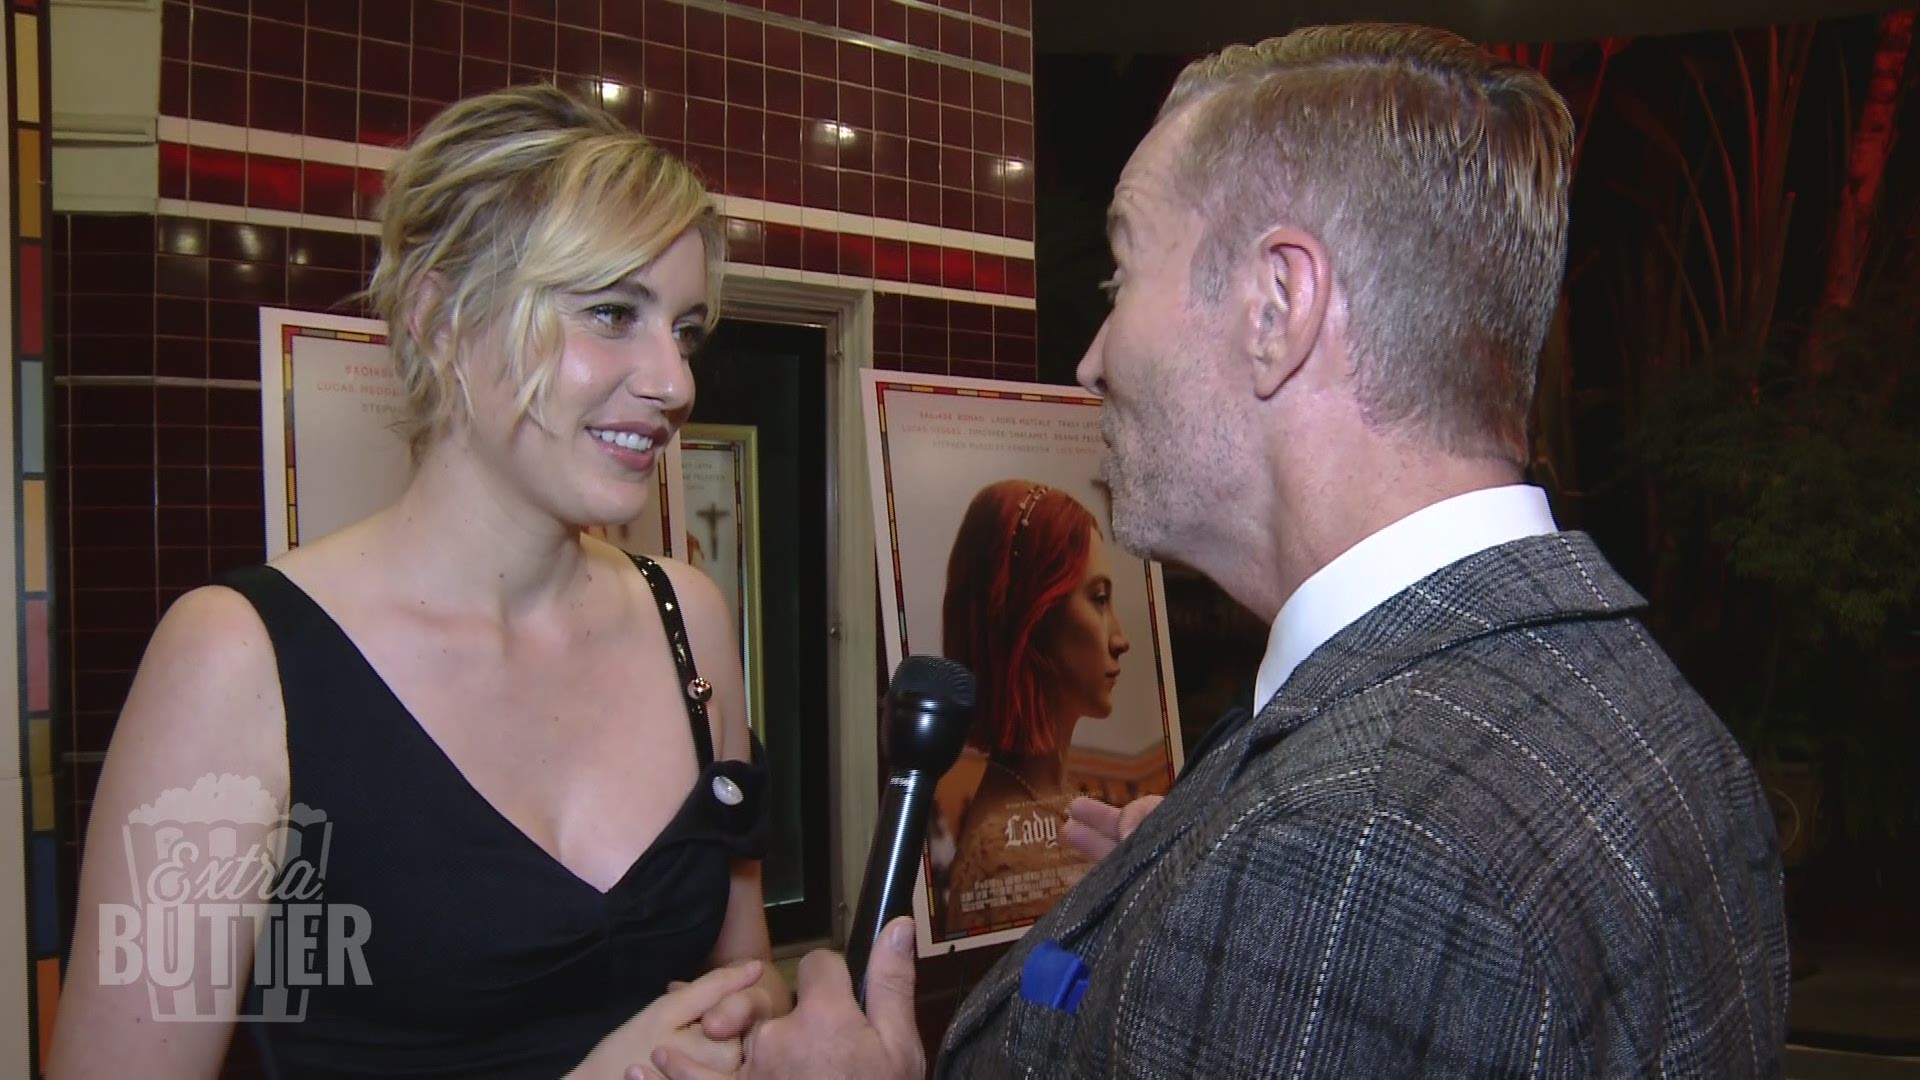 Greta Gerwig held her premiere for "Lady Bird" in Sacramento at The Tower Theater, where she talked to Mark about her film. (Travel and accommodation costs paid by A24 and Focus Features)